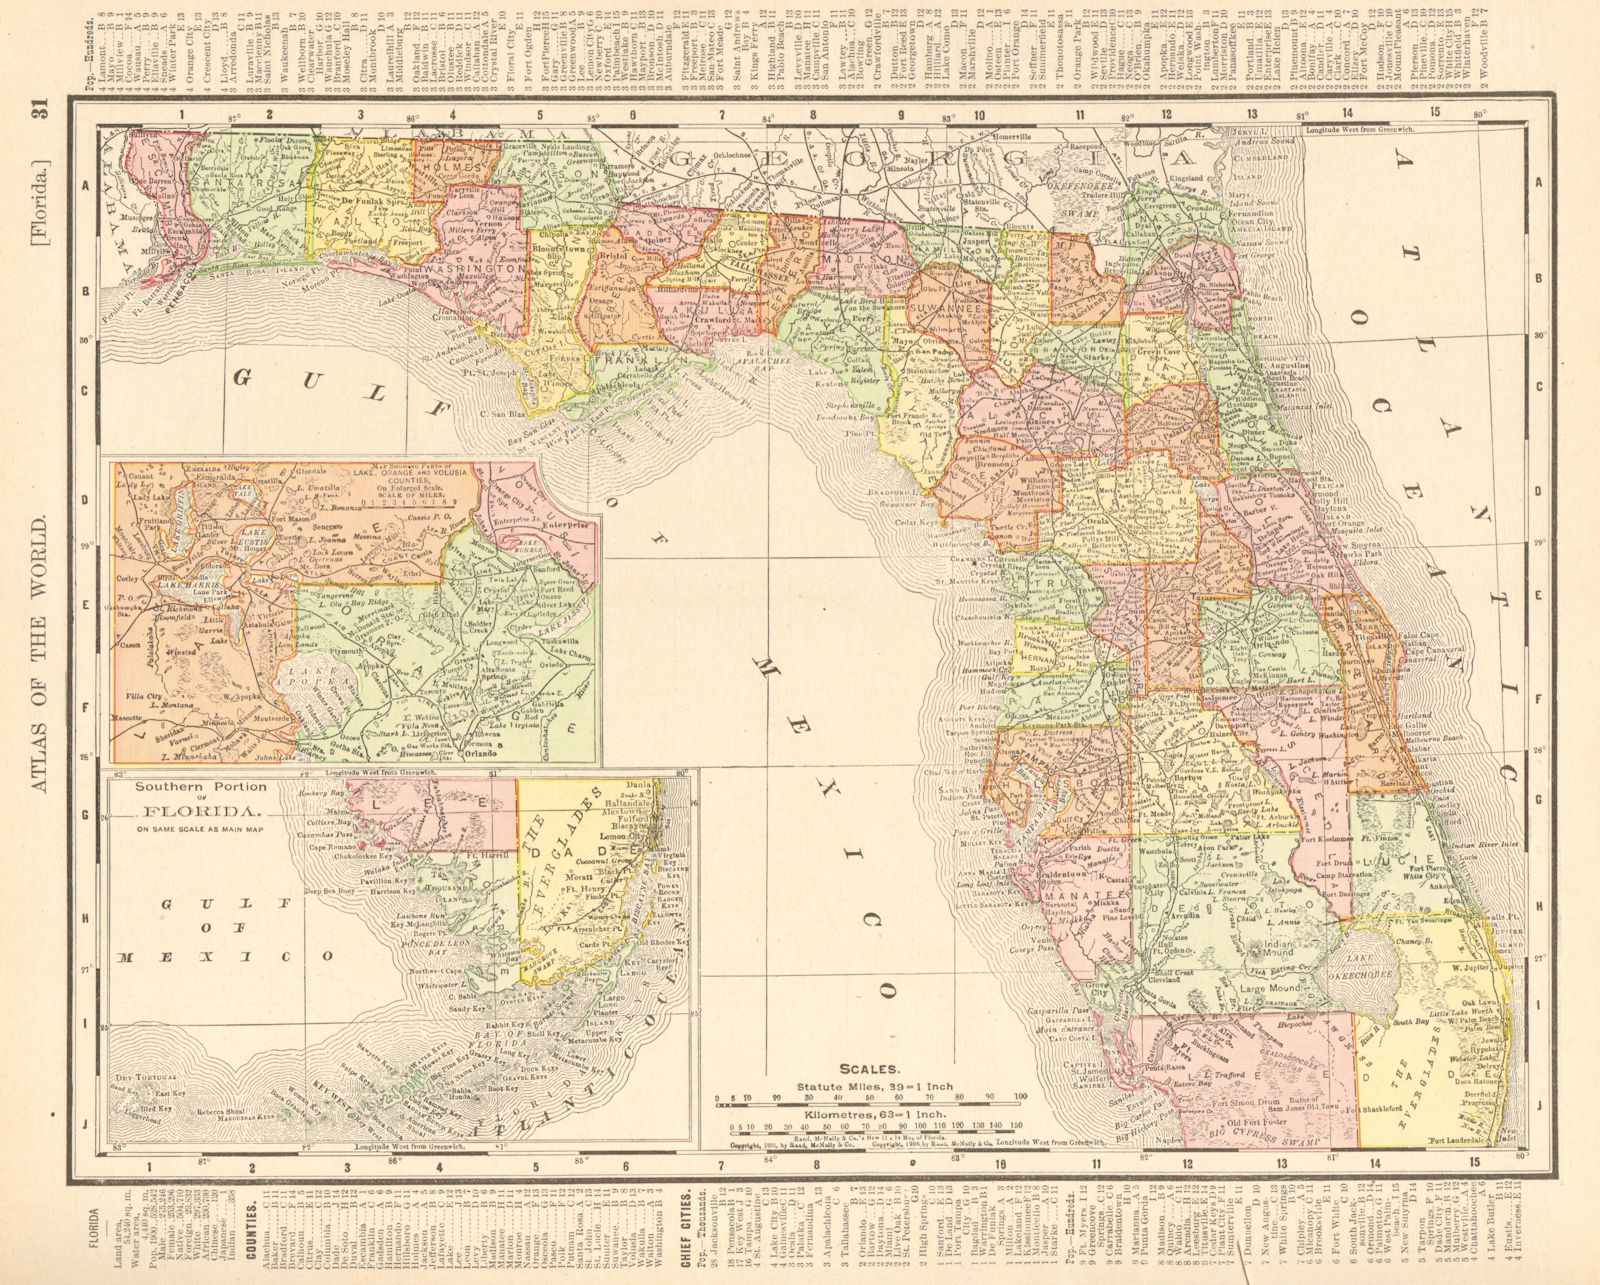 Associate Product Florida state map showing counties. RAND MCNALLY 1906 old antique chart